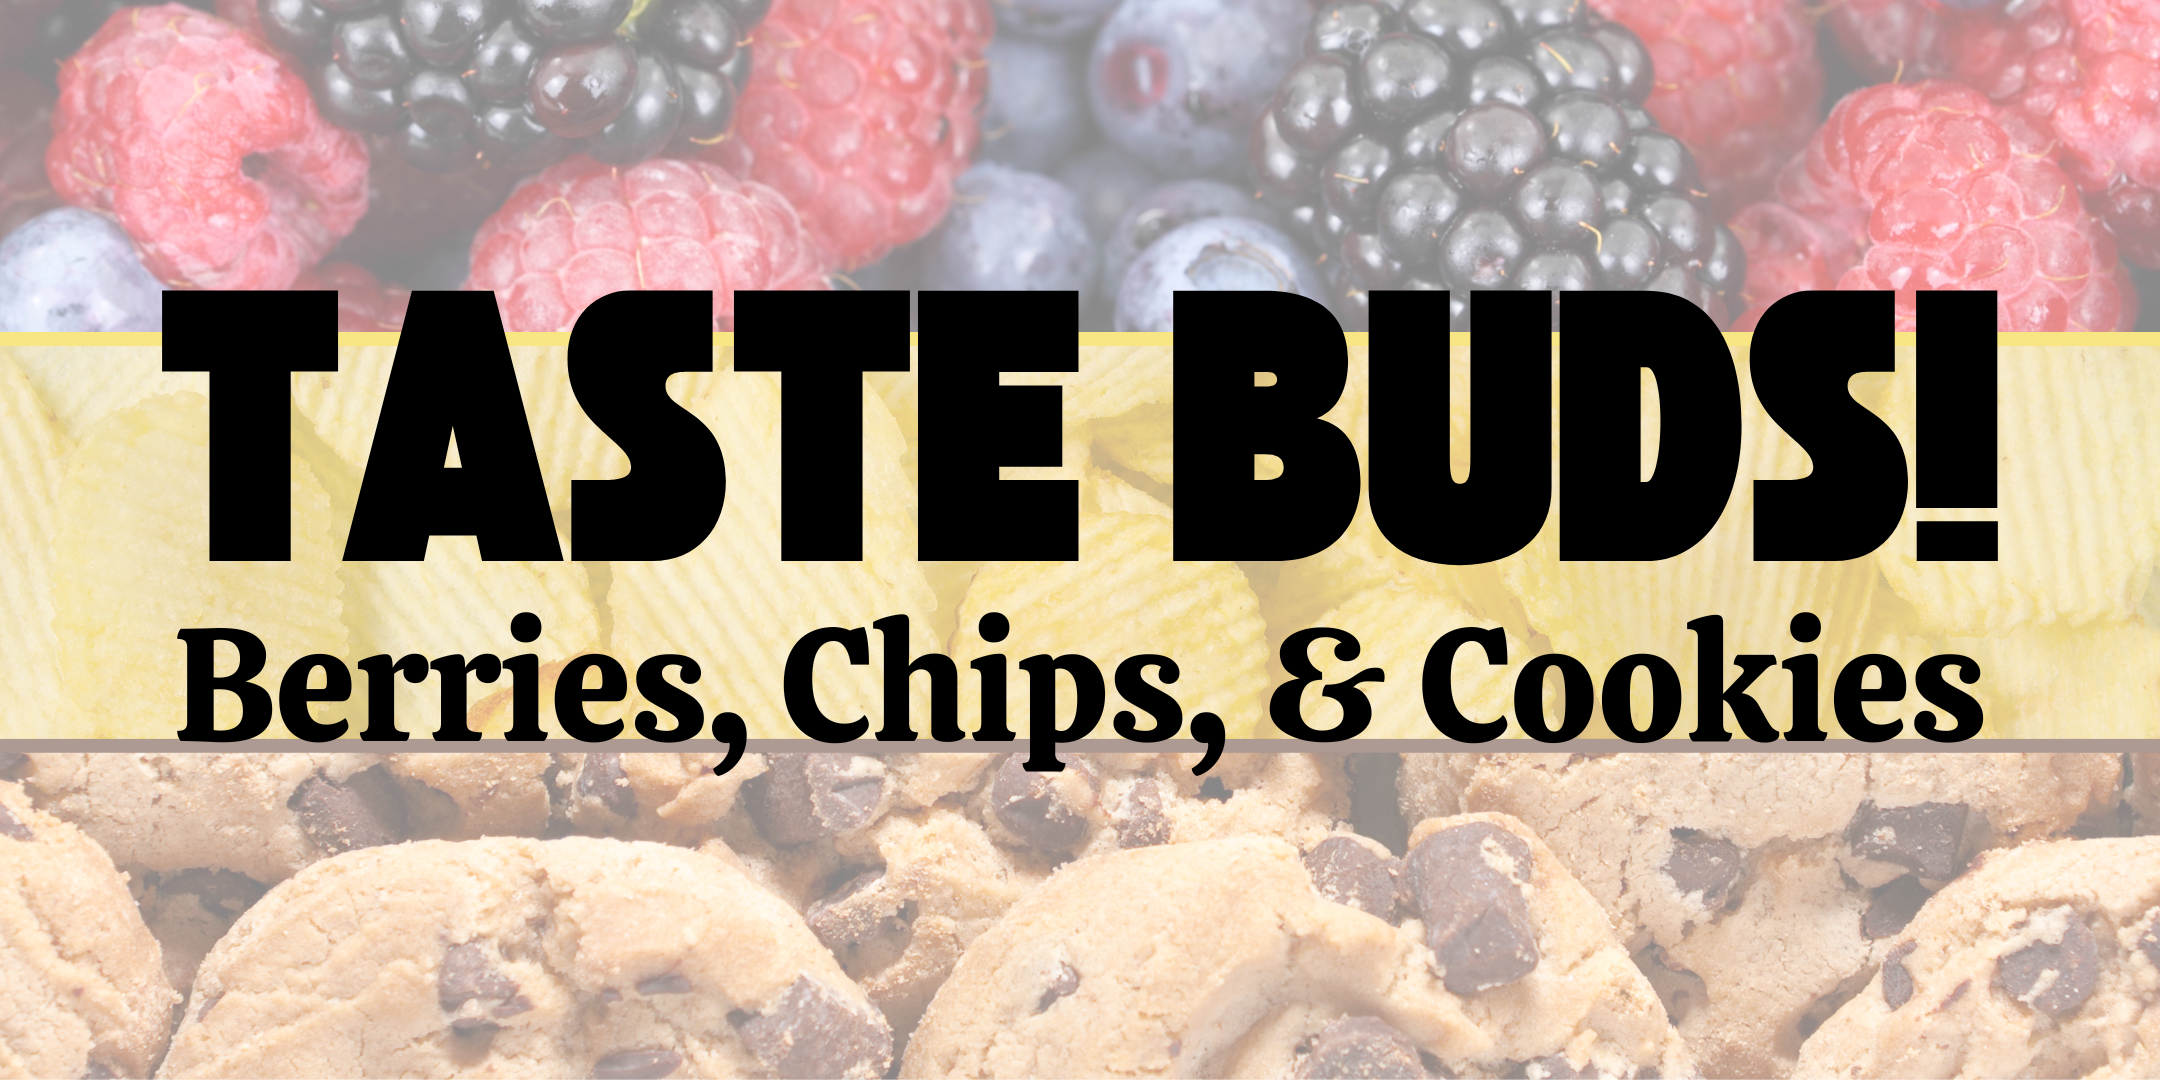 image of text stating Taste Buds!: Berries, Chips, & Cookies on a tinted background photos of the same food groups.